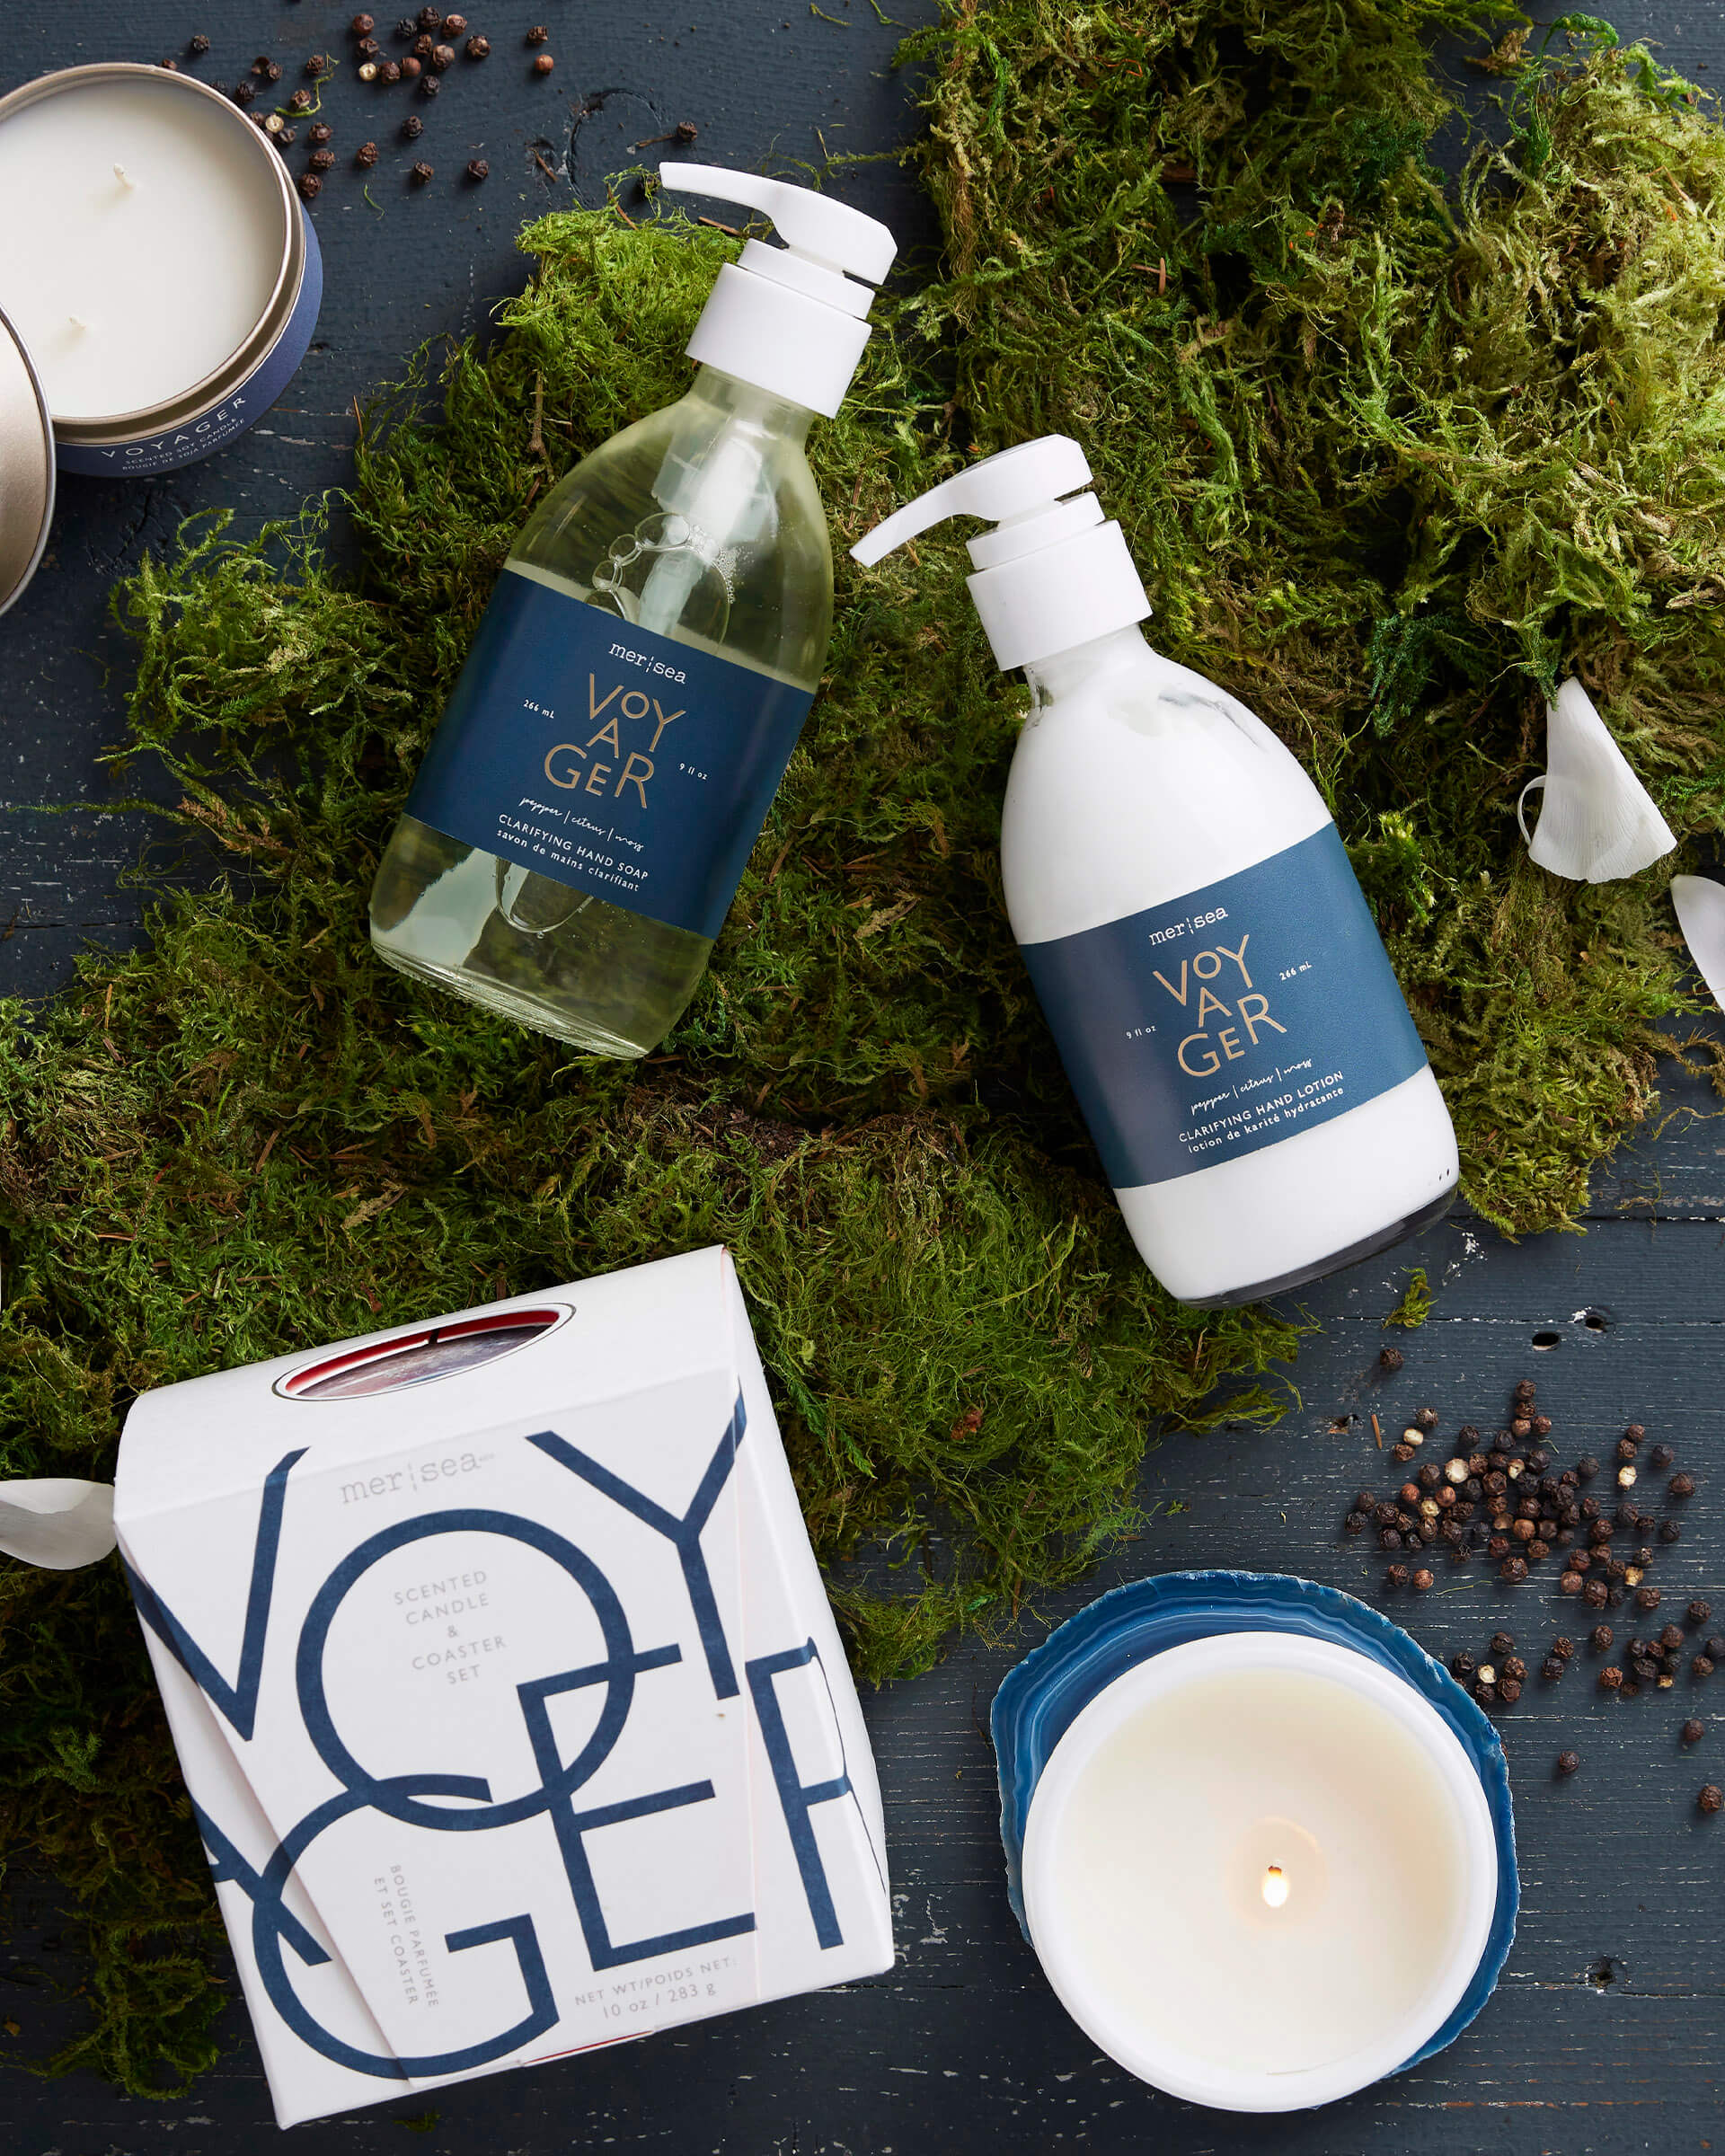 voyager liquid hand soap shea lotion and boxed candle laying on grass